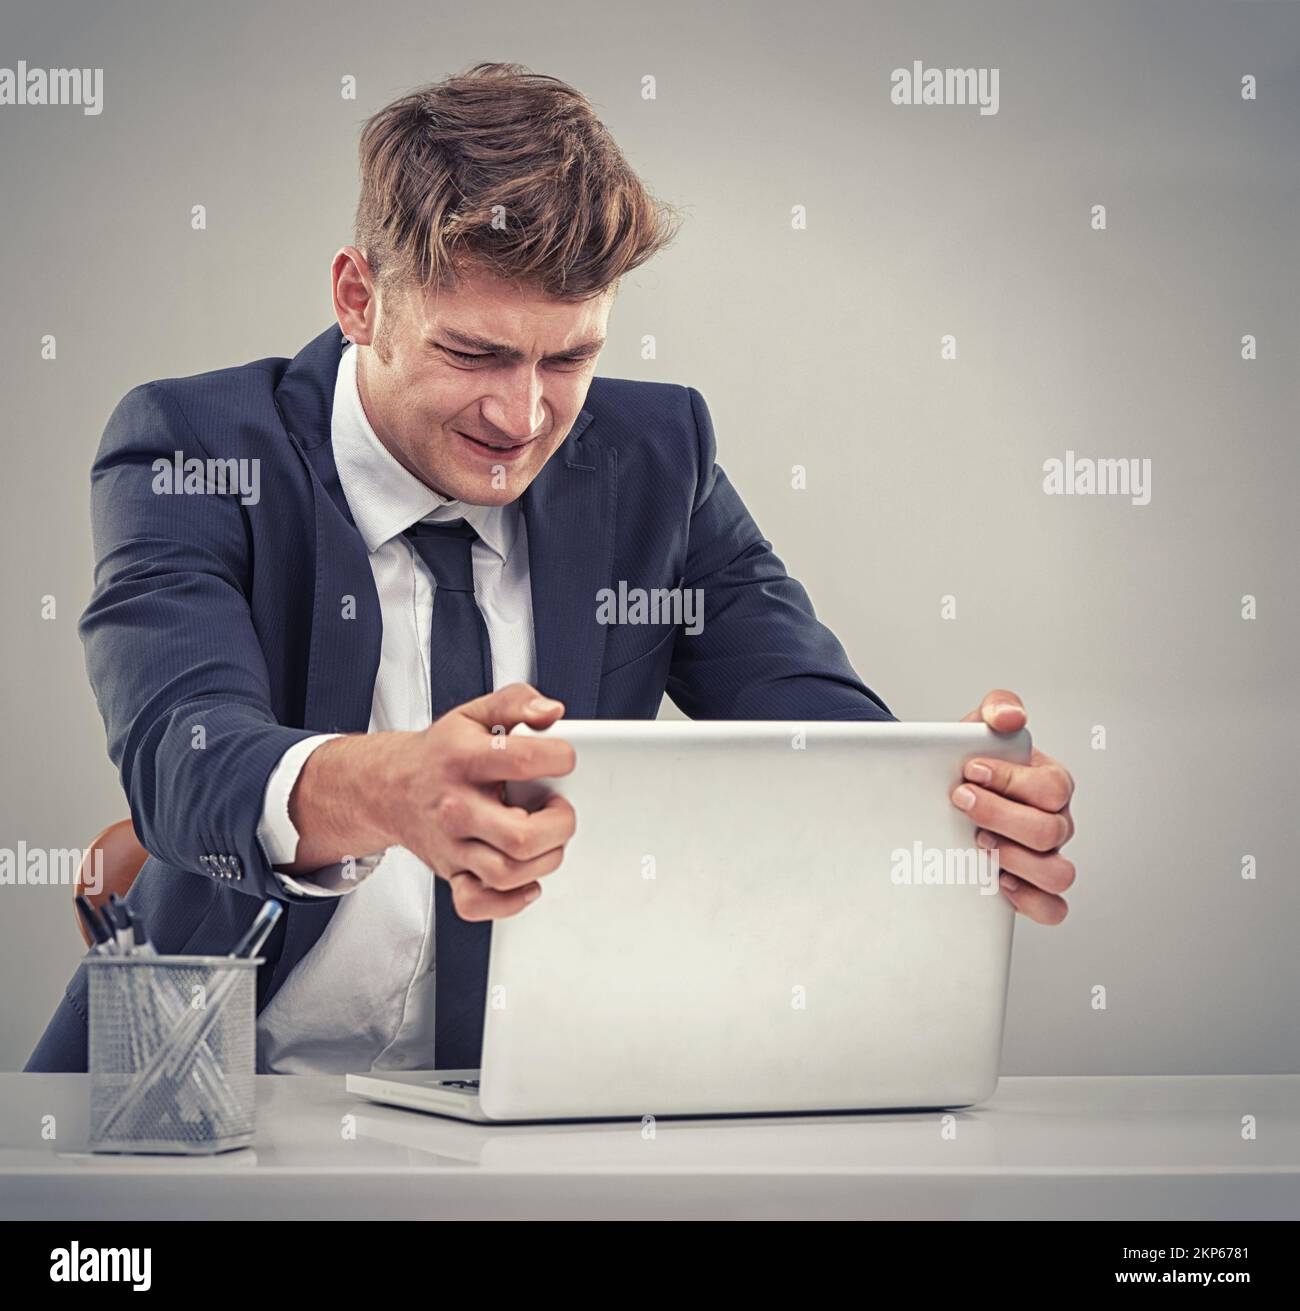 Feeling the strains of a huge corporate job. Young business man looking unhappy at his work desk. Stock Photo